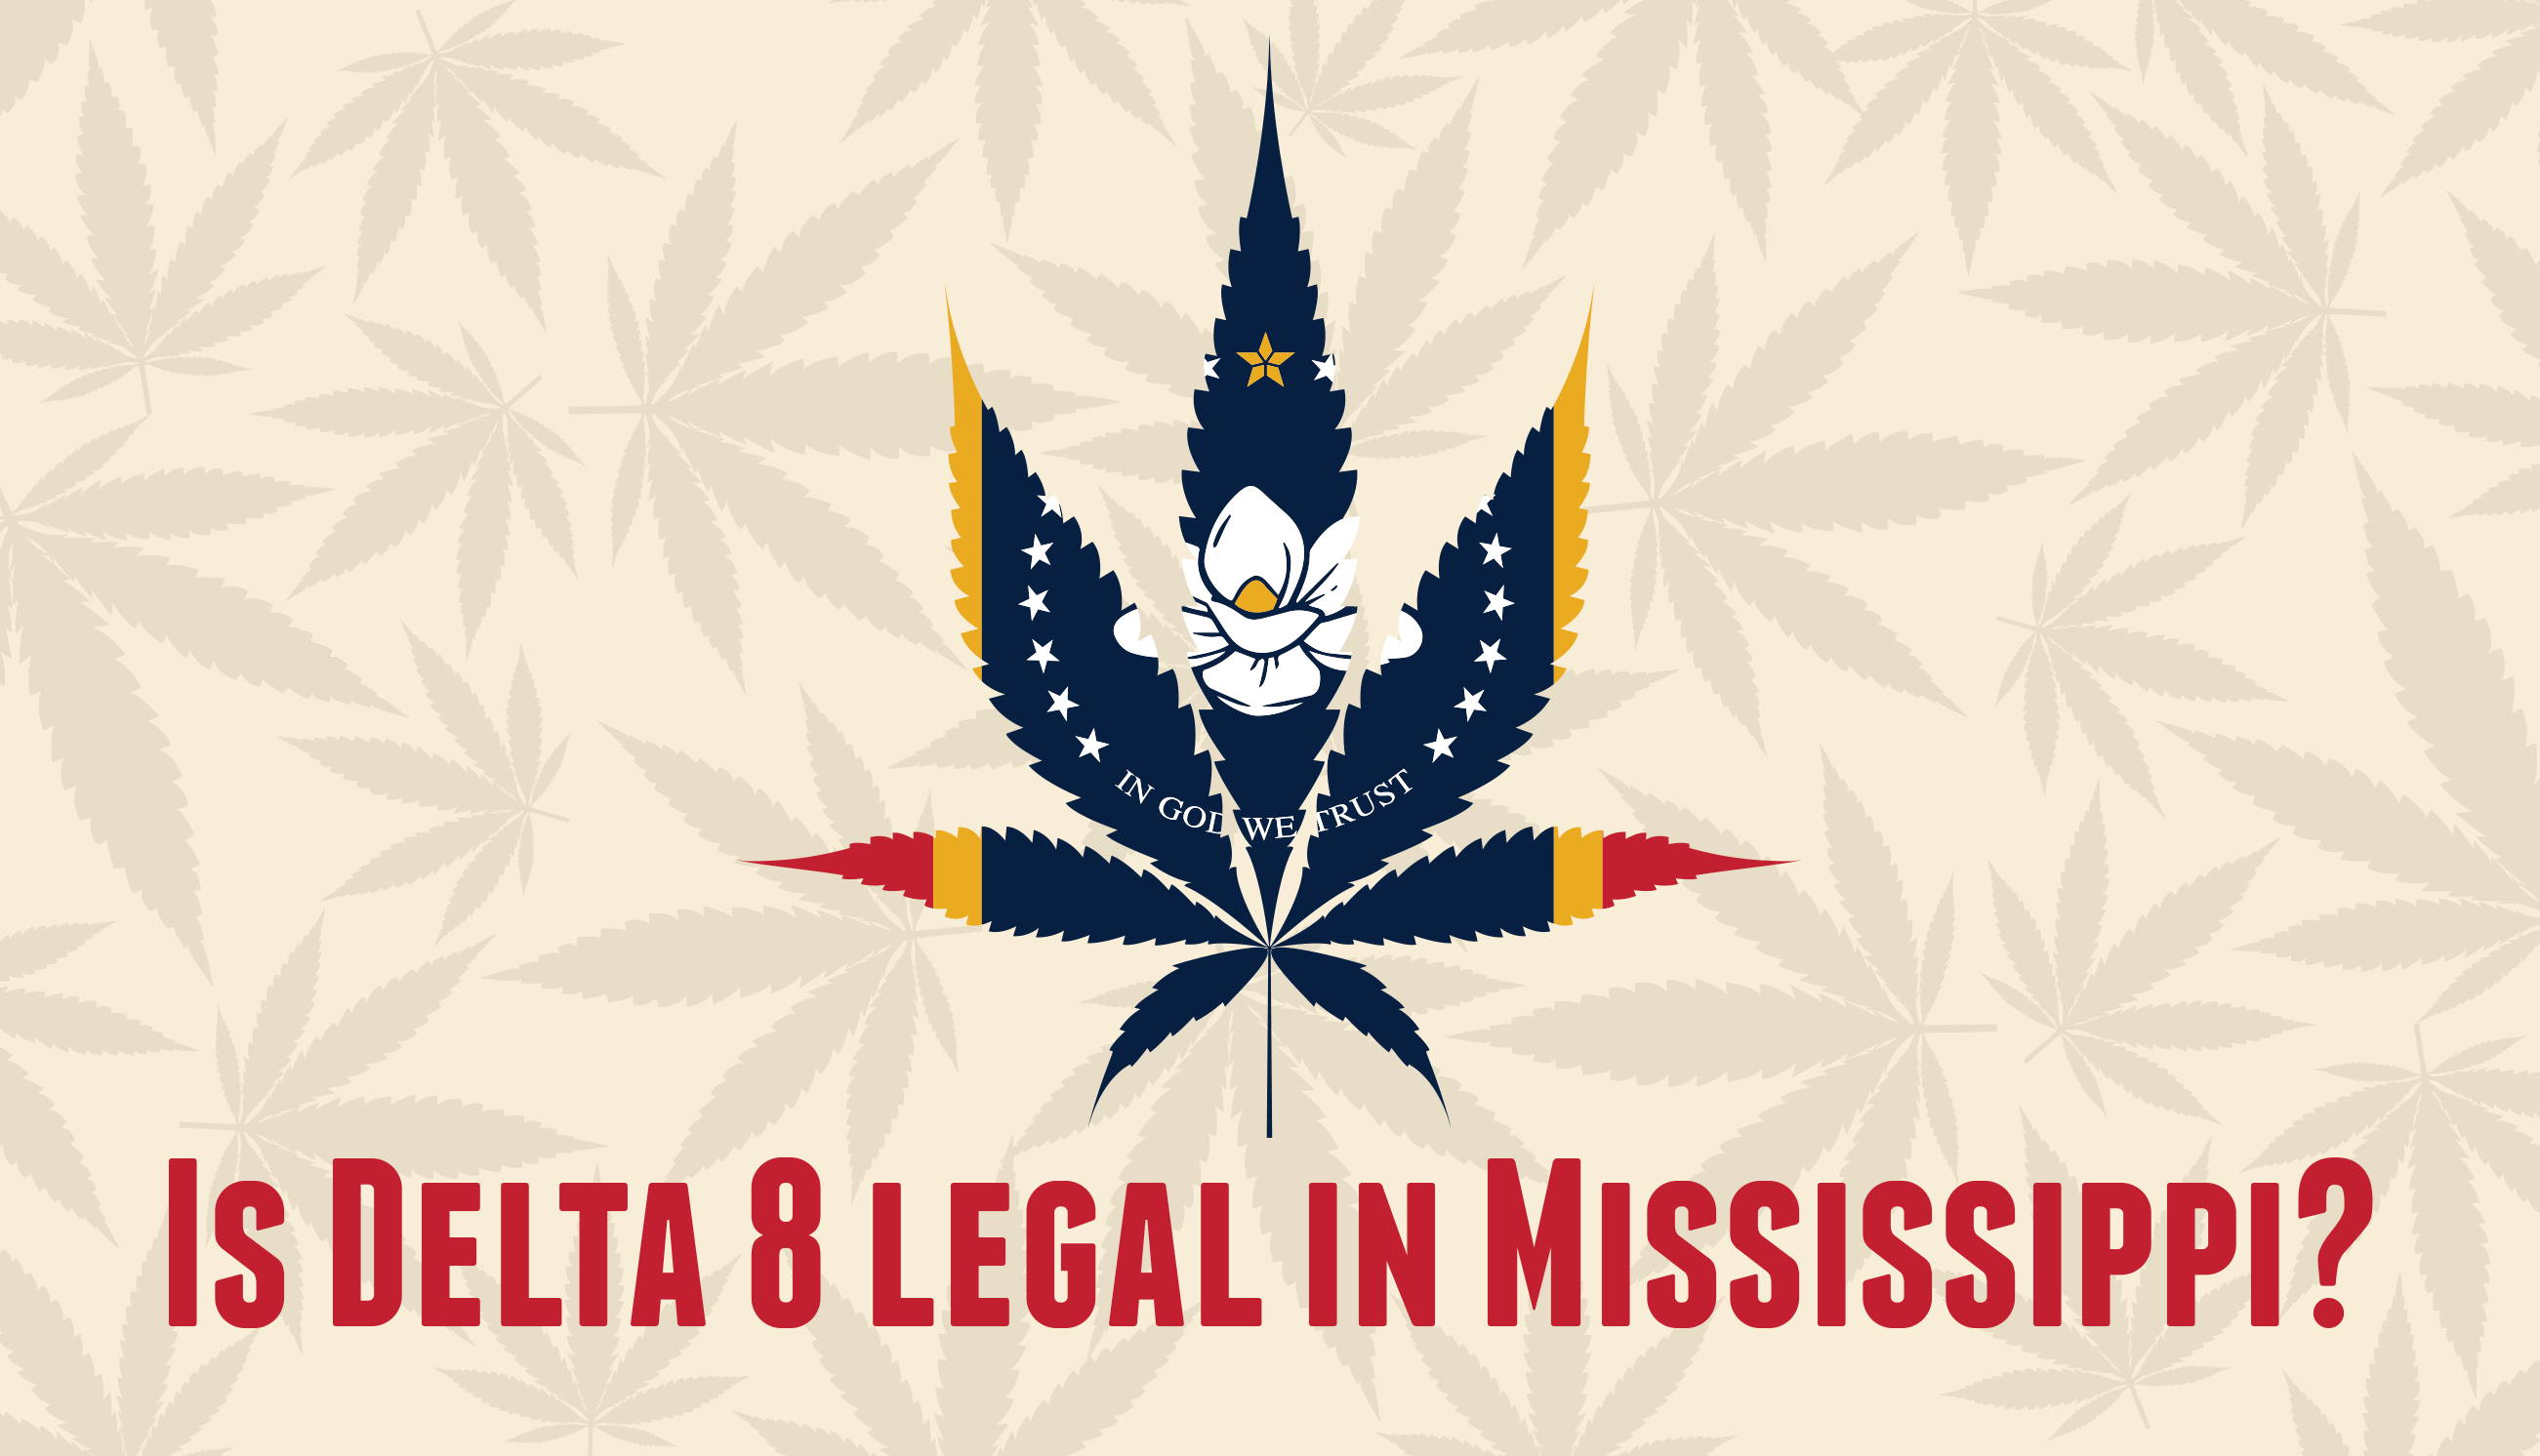 Is Delta 8 legal in Mississippi?